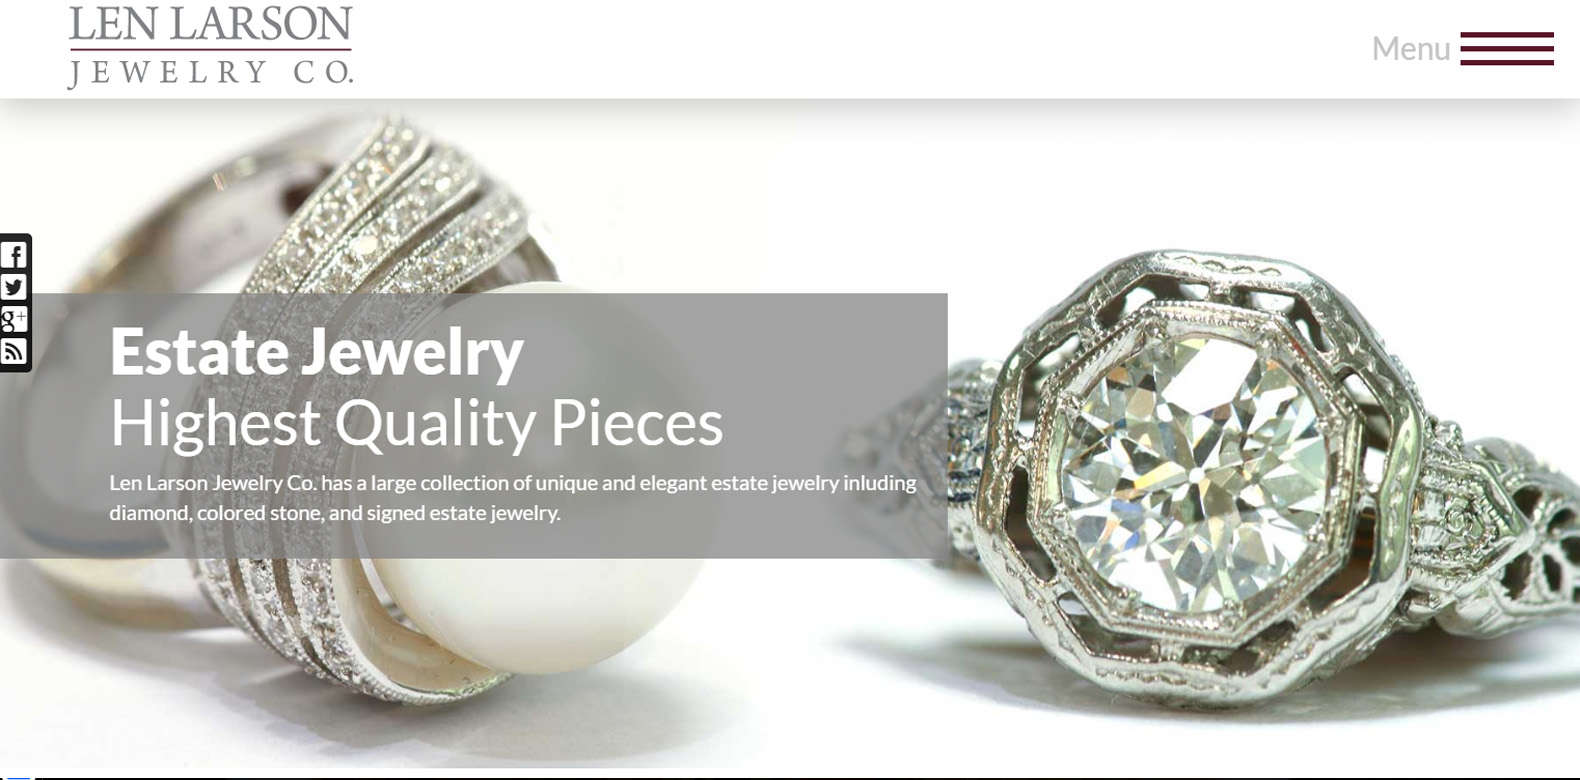 
New Upgrade Launched: Len Larson Jewelry